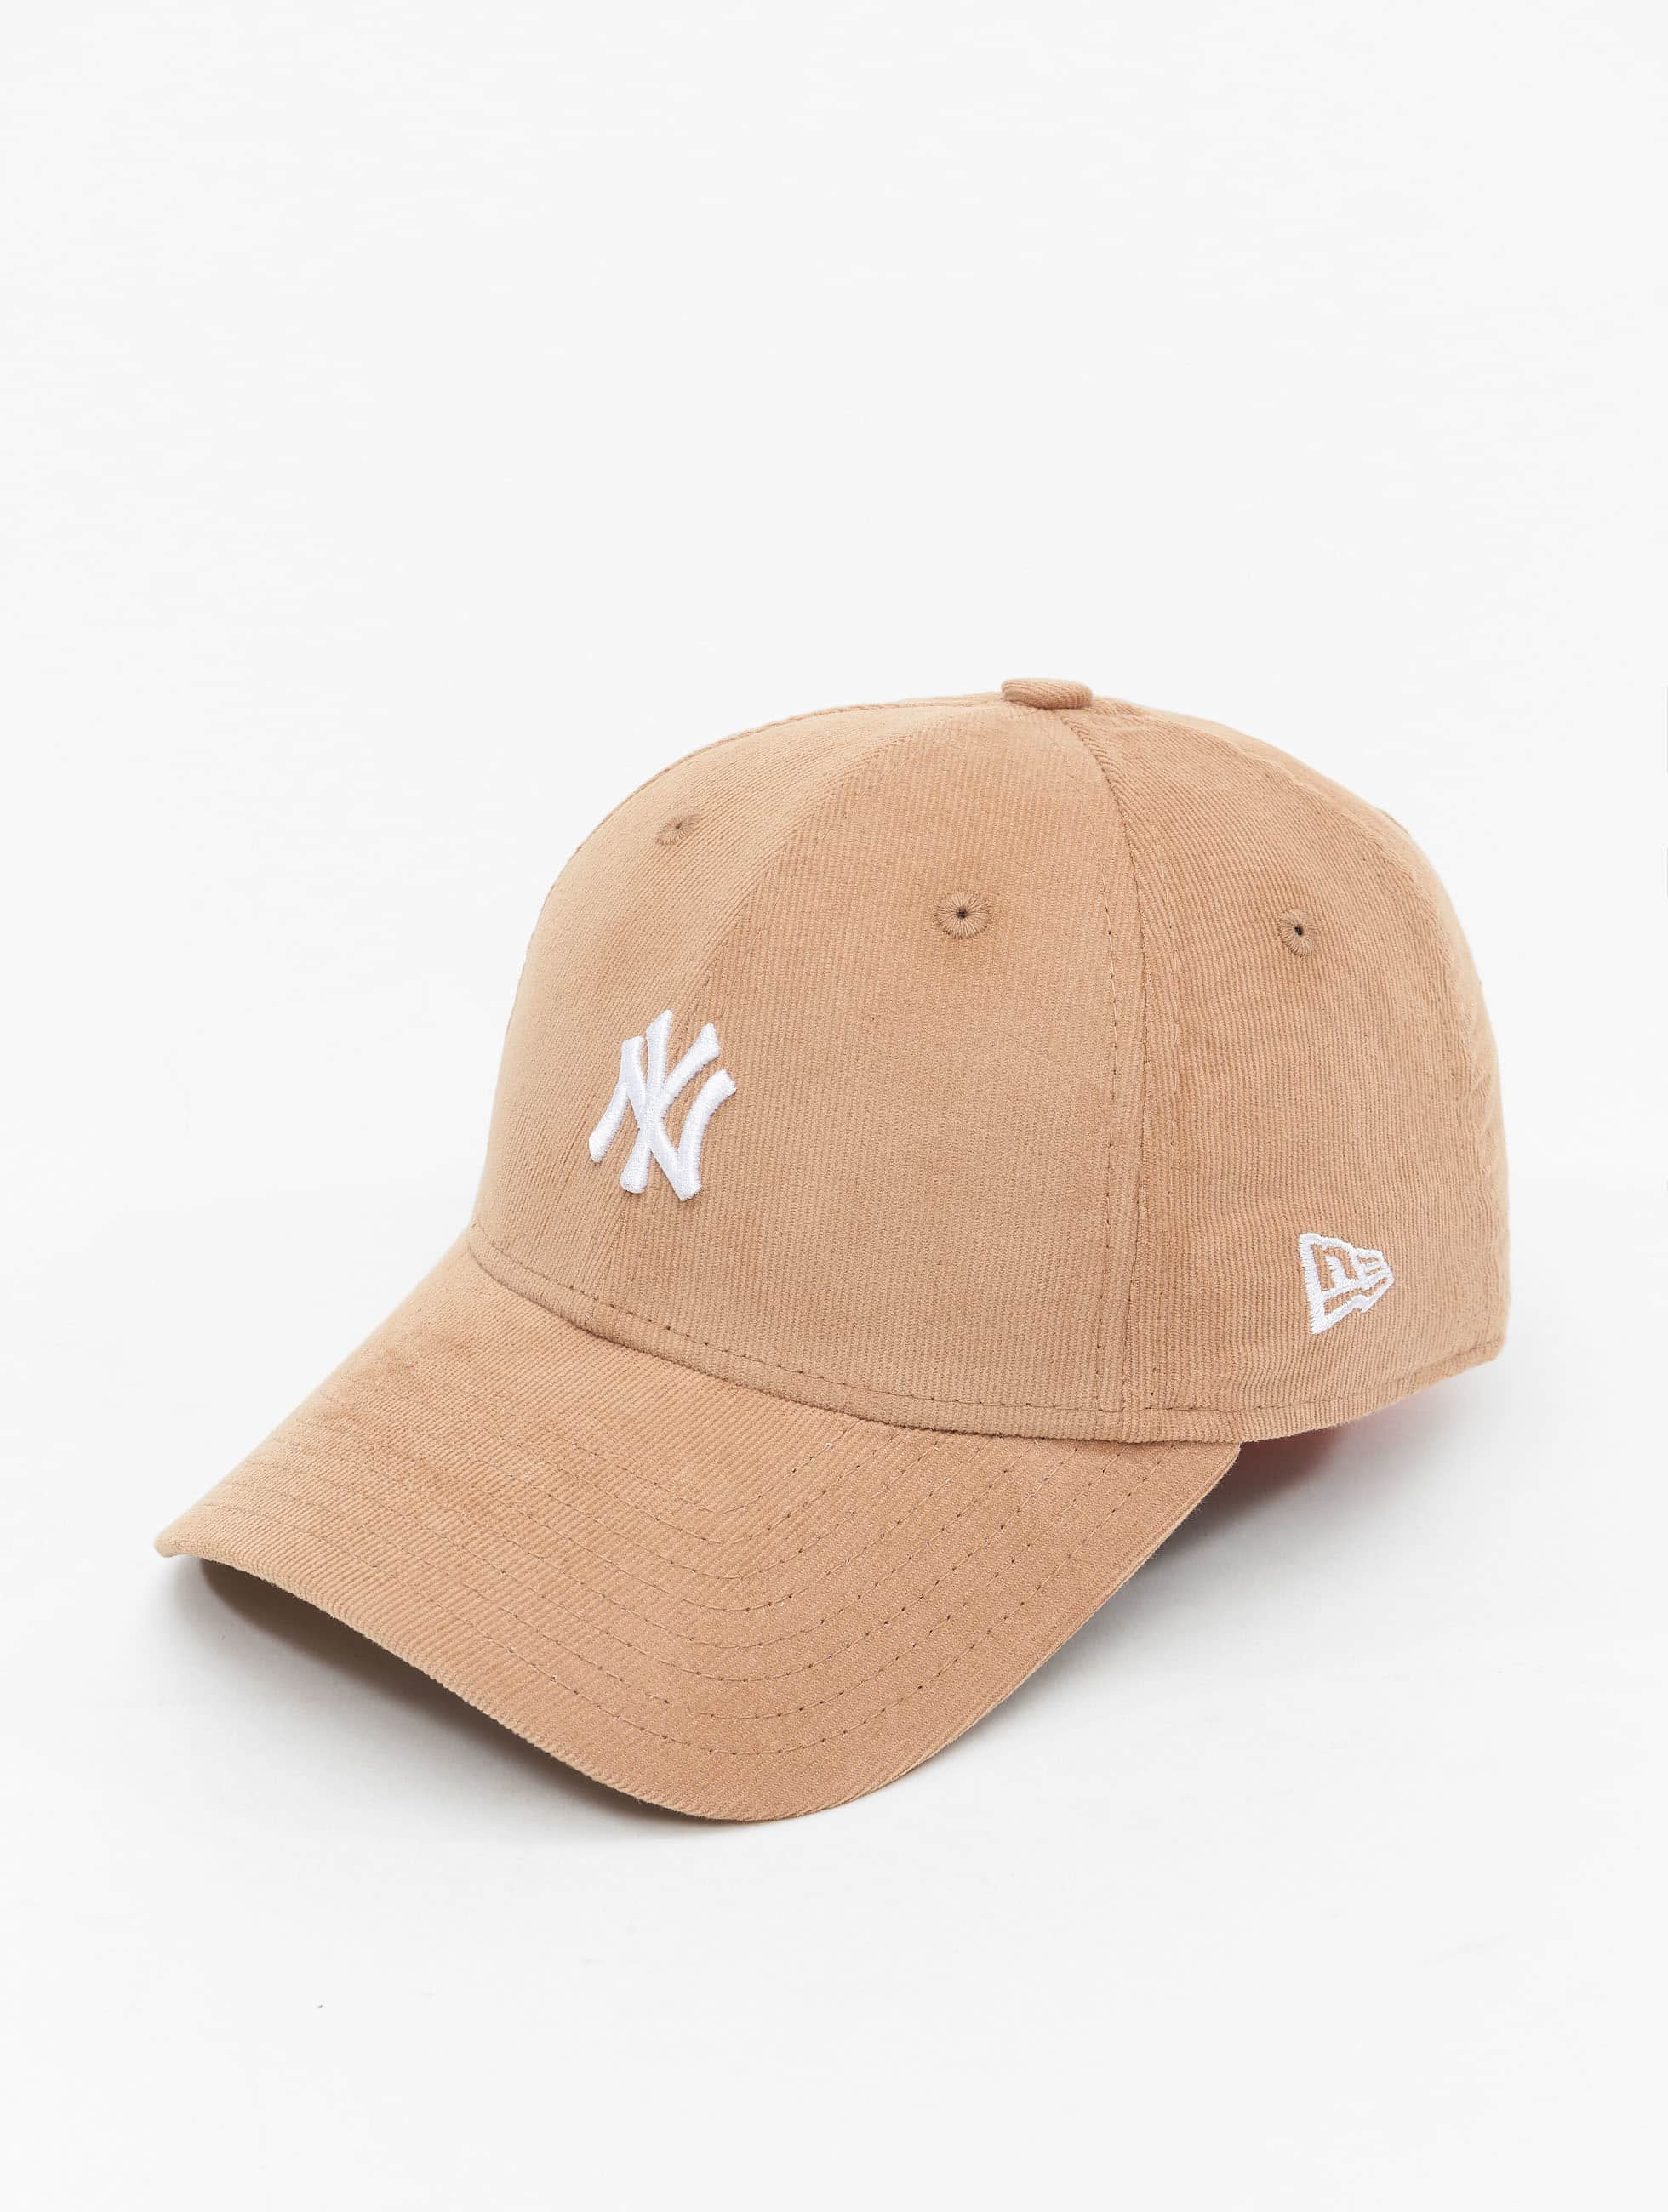 MLB New York Yankees Cap Light Brown Mens Fashion Watches   Accessories Cap  Hats on Carousell